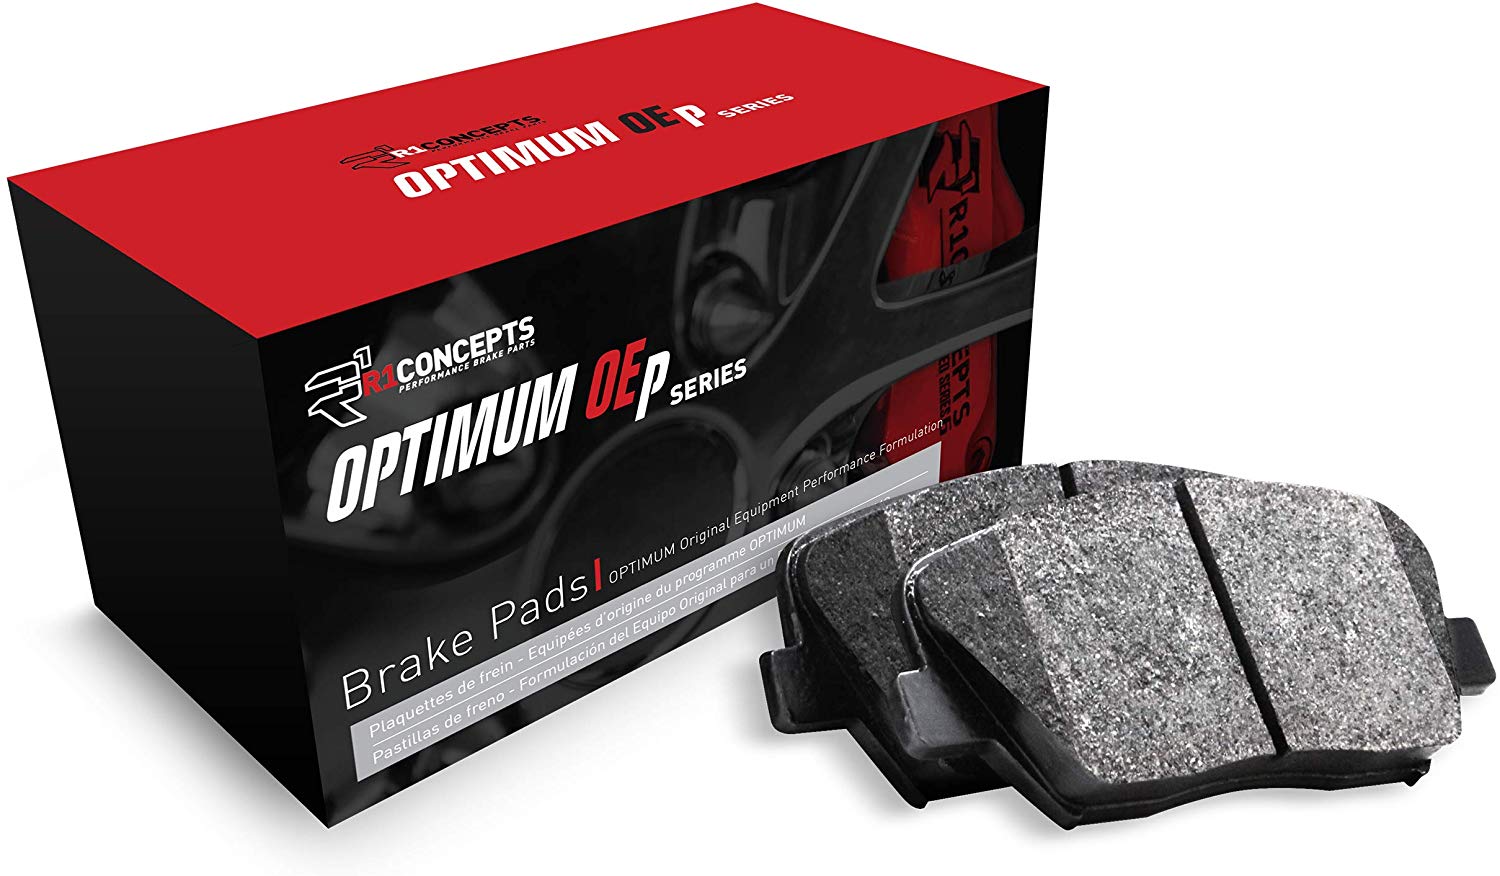 Front Optimum Oep Series Brake Pad With Rubber Steel Rubber Shims